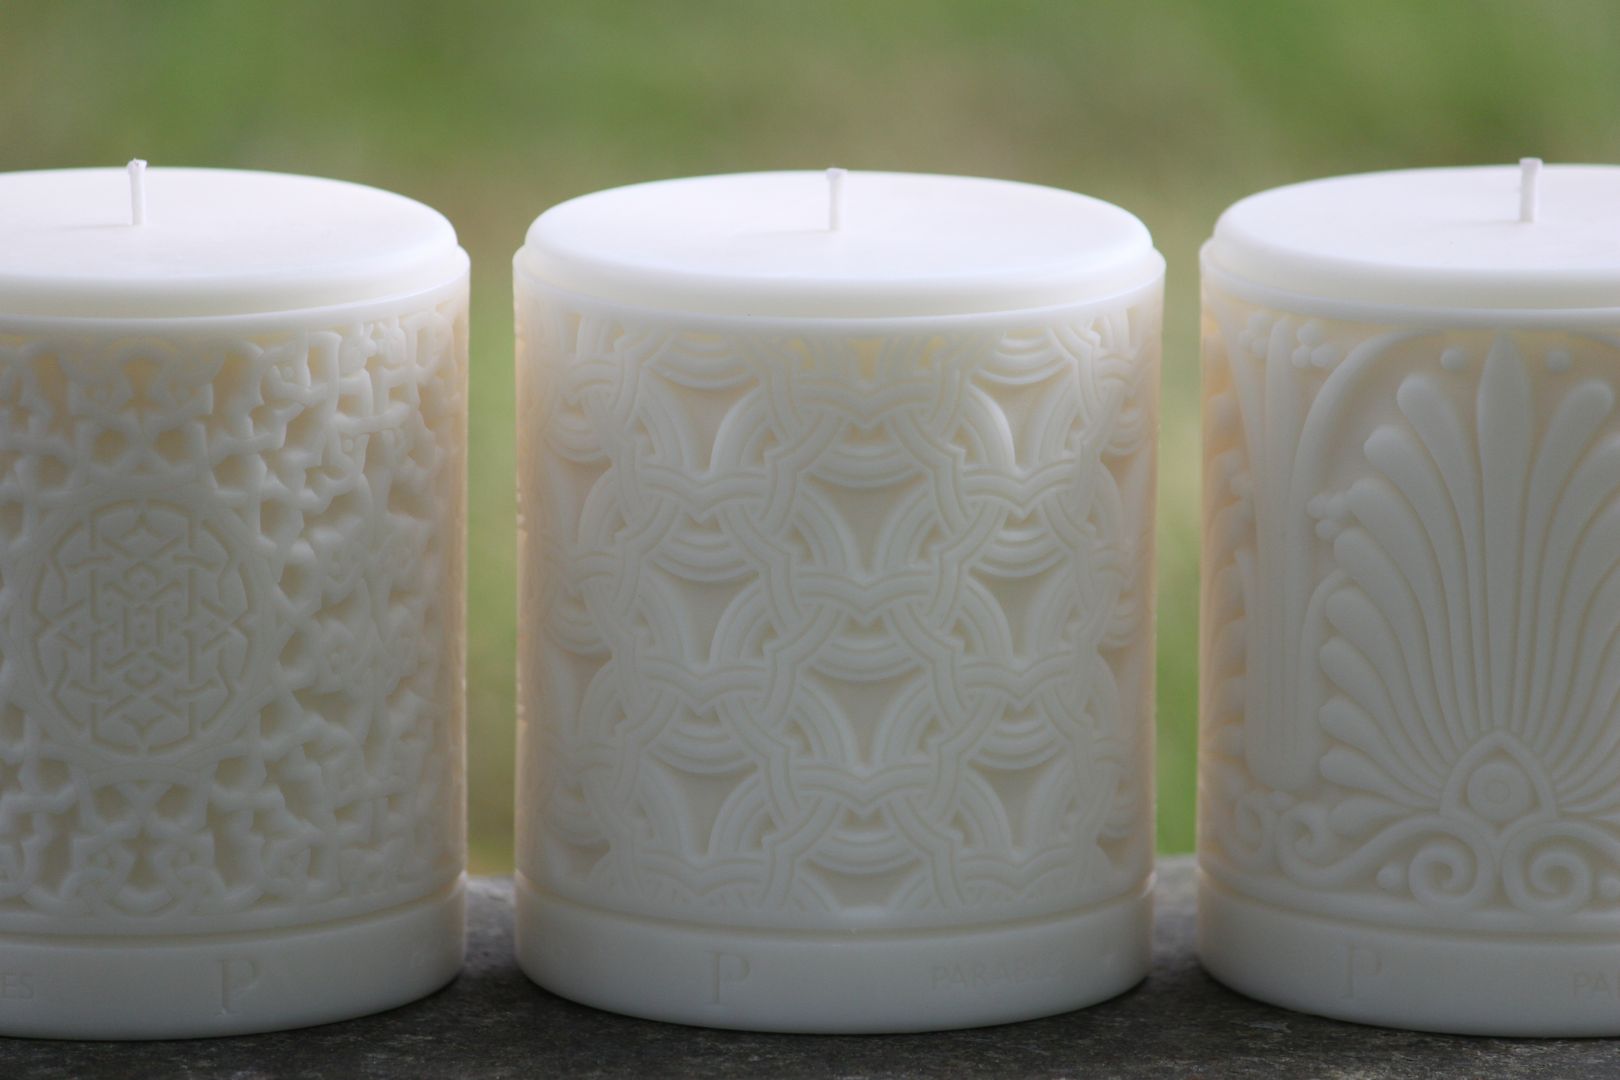 Luxury Middle Eastern, Moorish, Asian rapeseed wax candles Parable Designs Ltd 아시아스타일 주택 Accessories & decoration